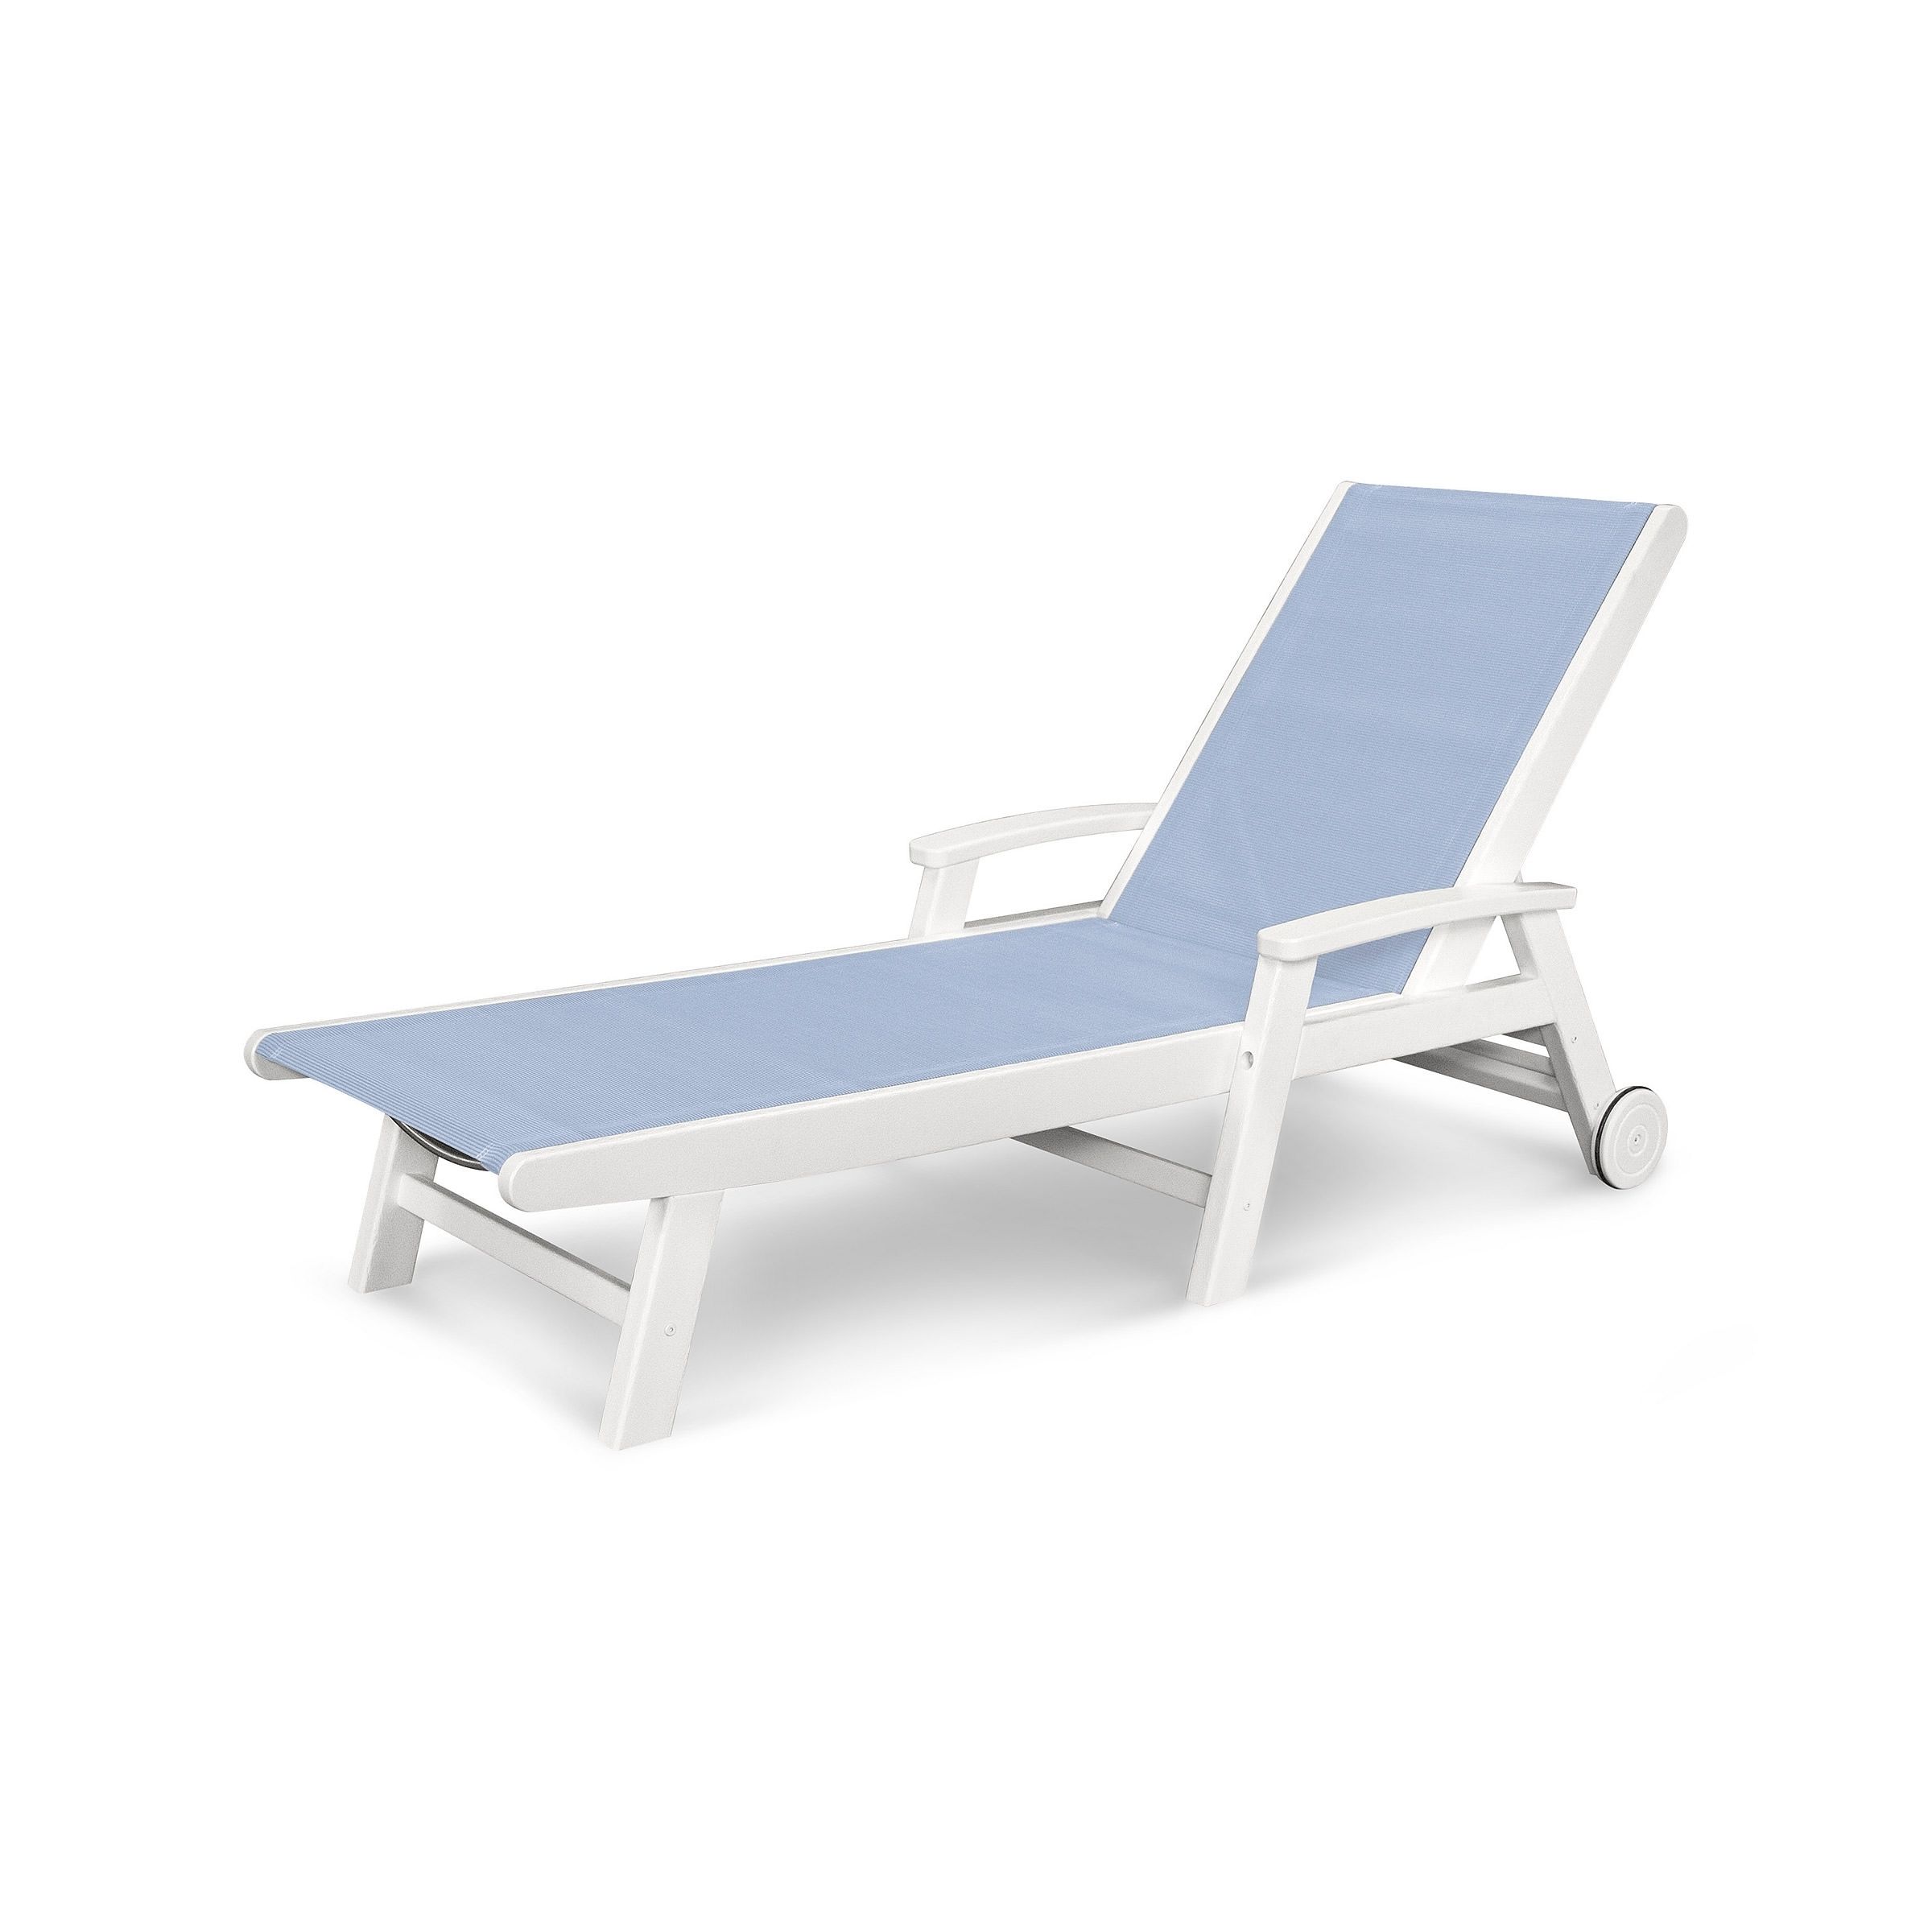 Resin Chaise Lounge Chairs • Lounge Chairs Ideas With Trendy Resin Chaise Lounges (View 8 of 15)